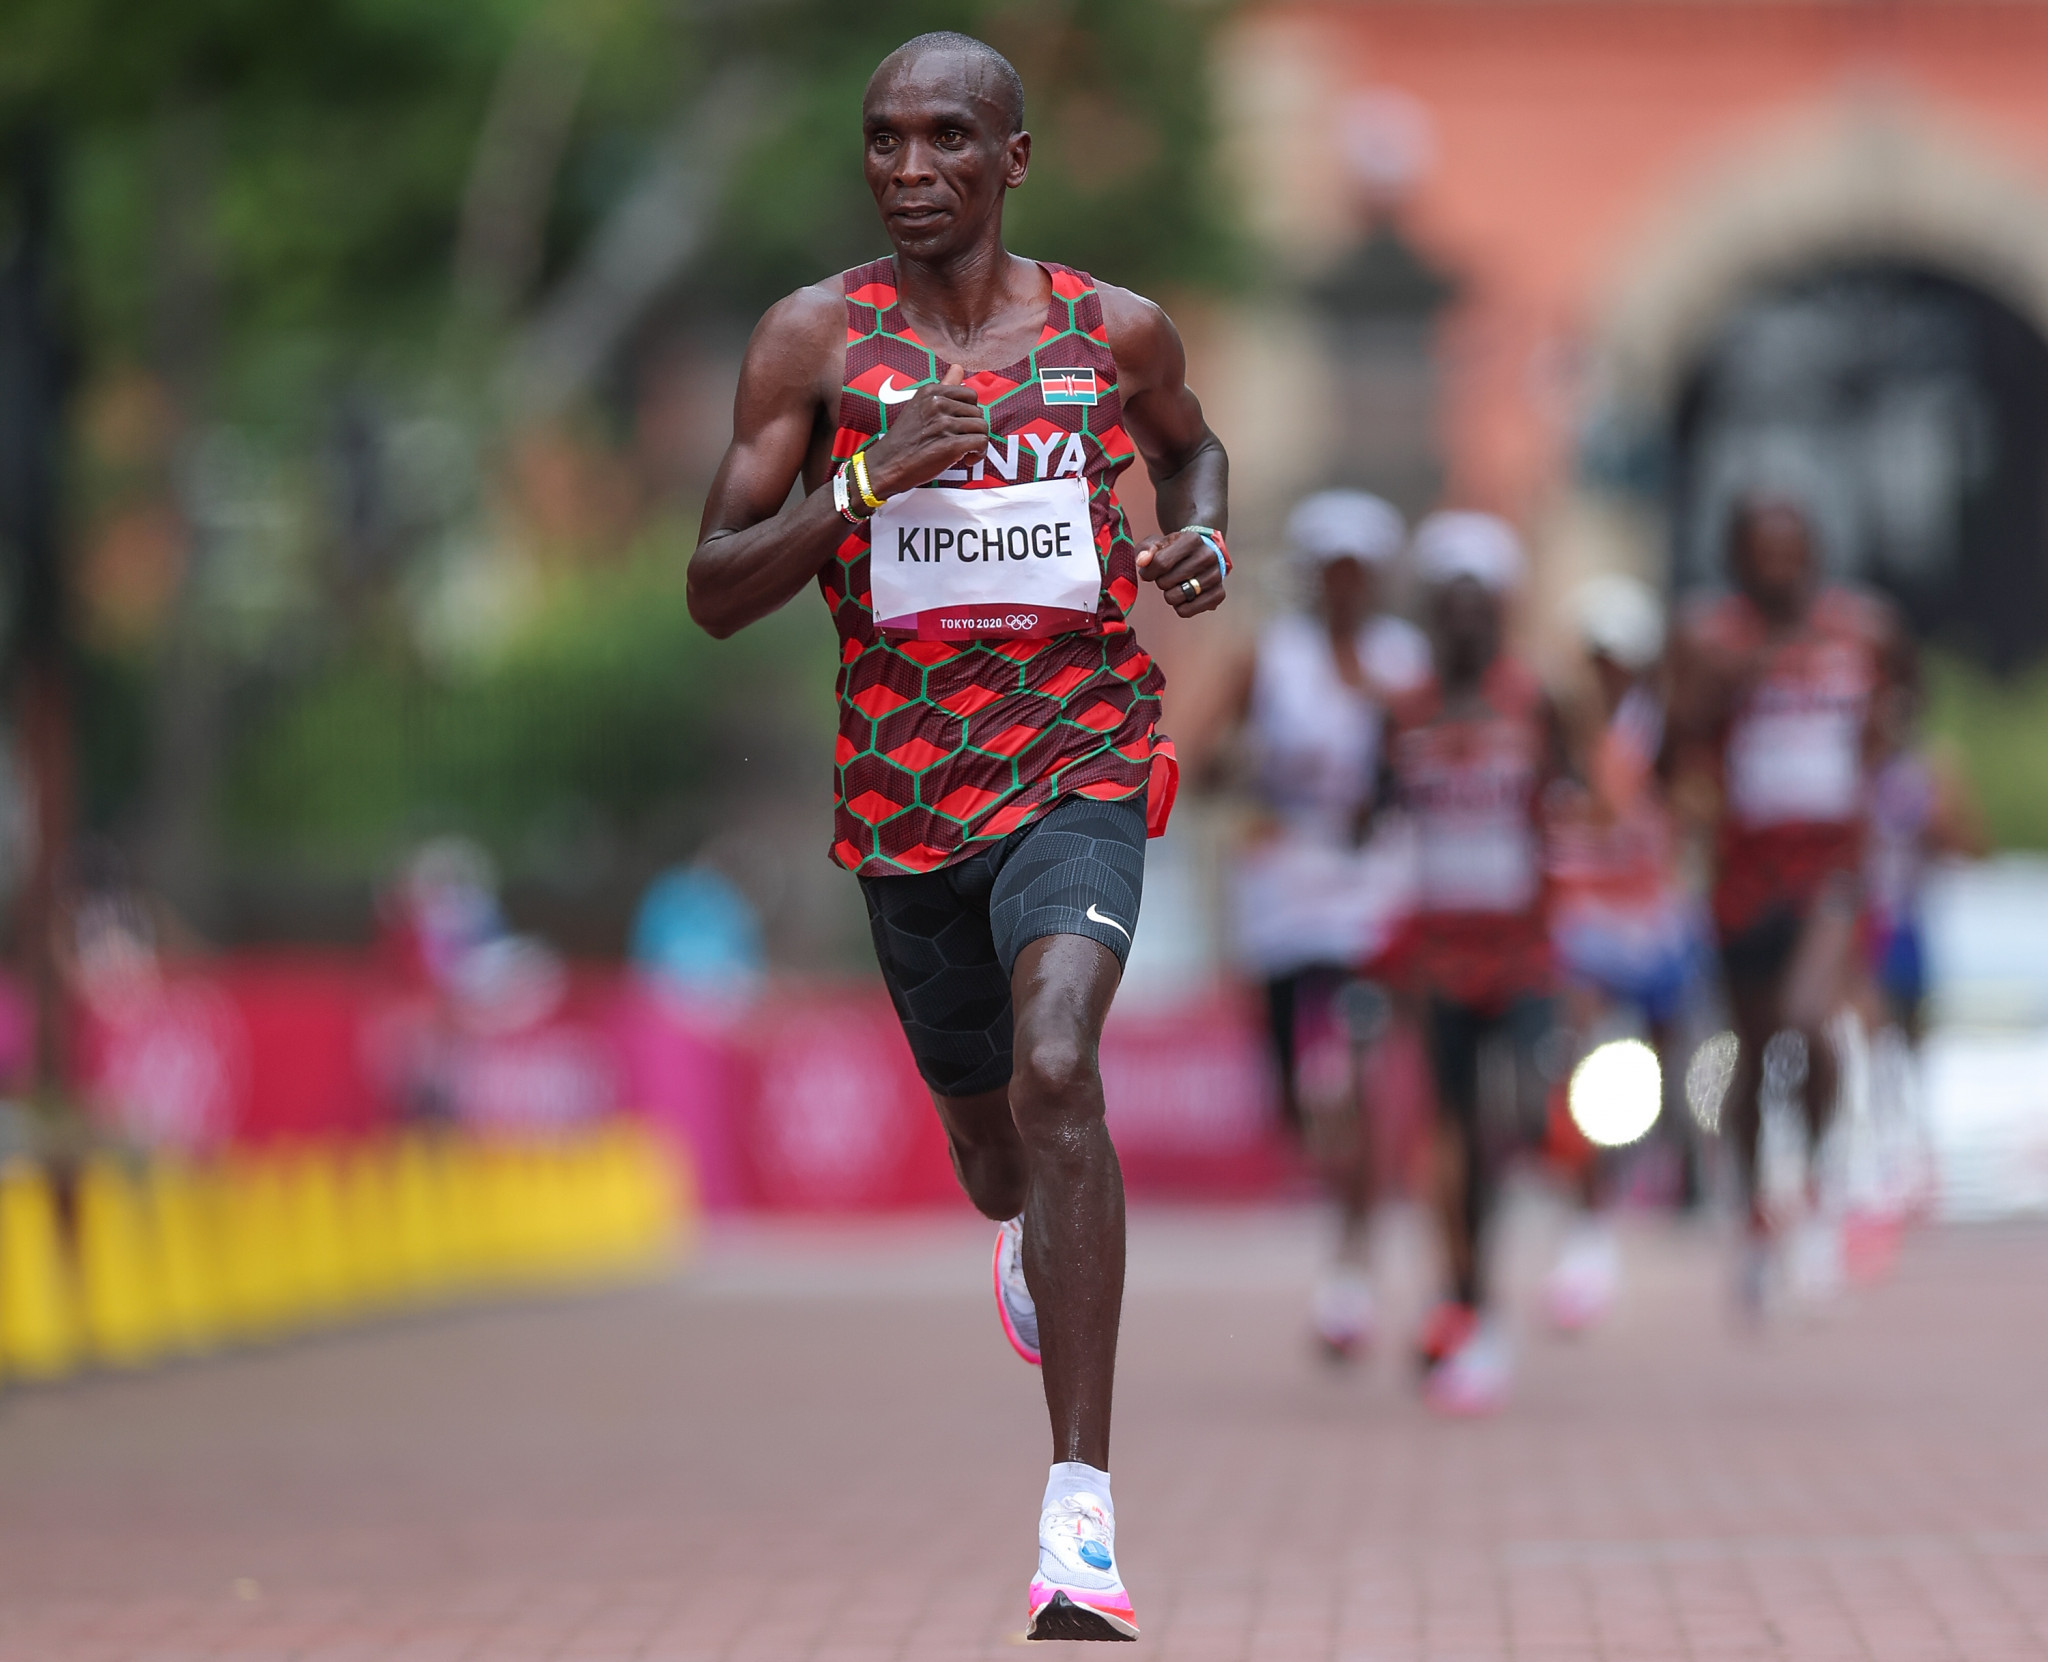 Eliud Kipchoge has won back-to-back Olympic marathon gold medals ©Getty Images